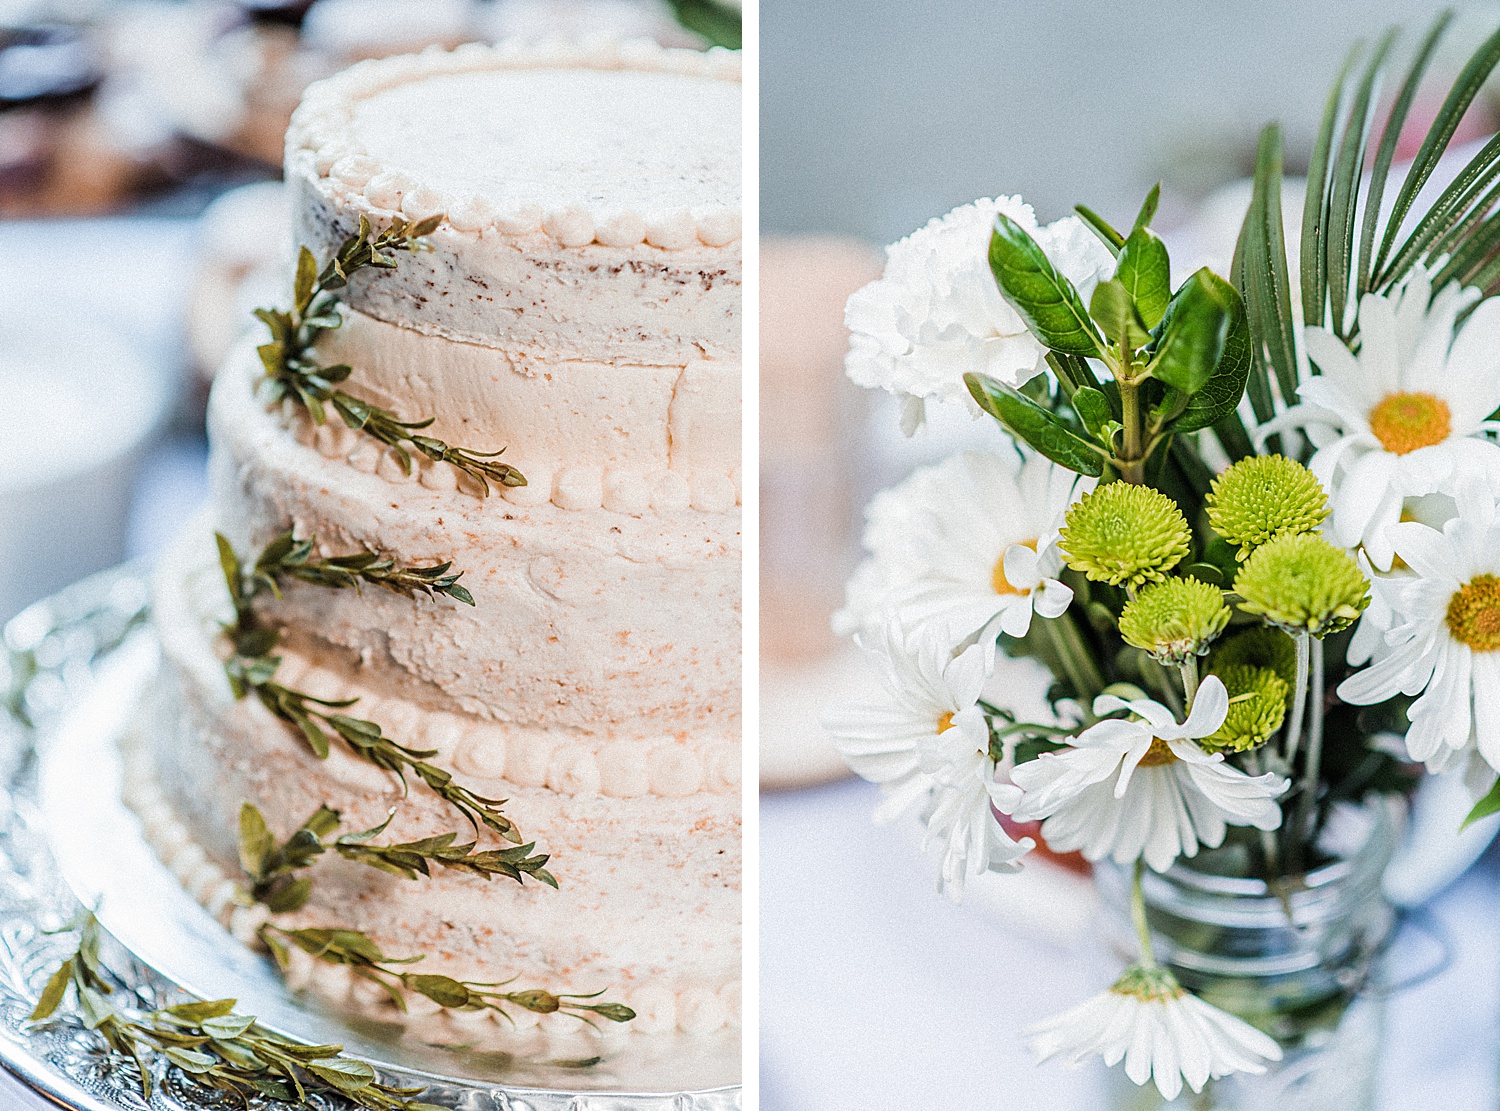 wedding cake and some flowers for decoration